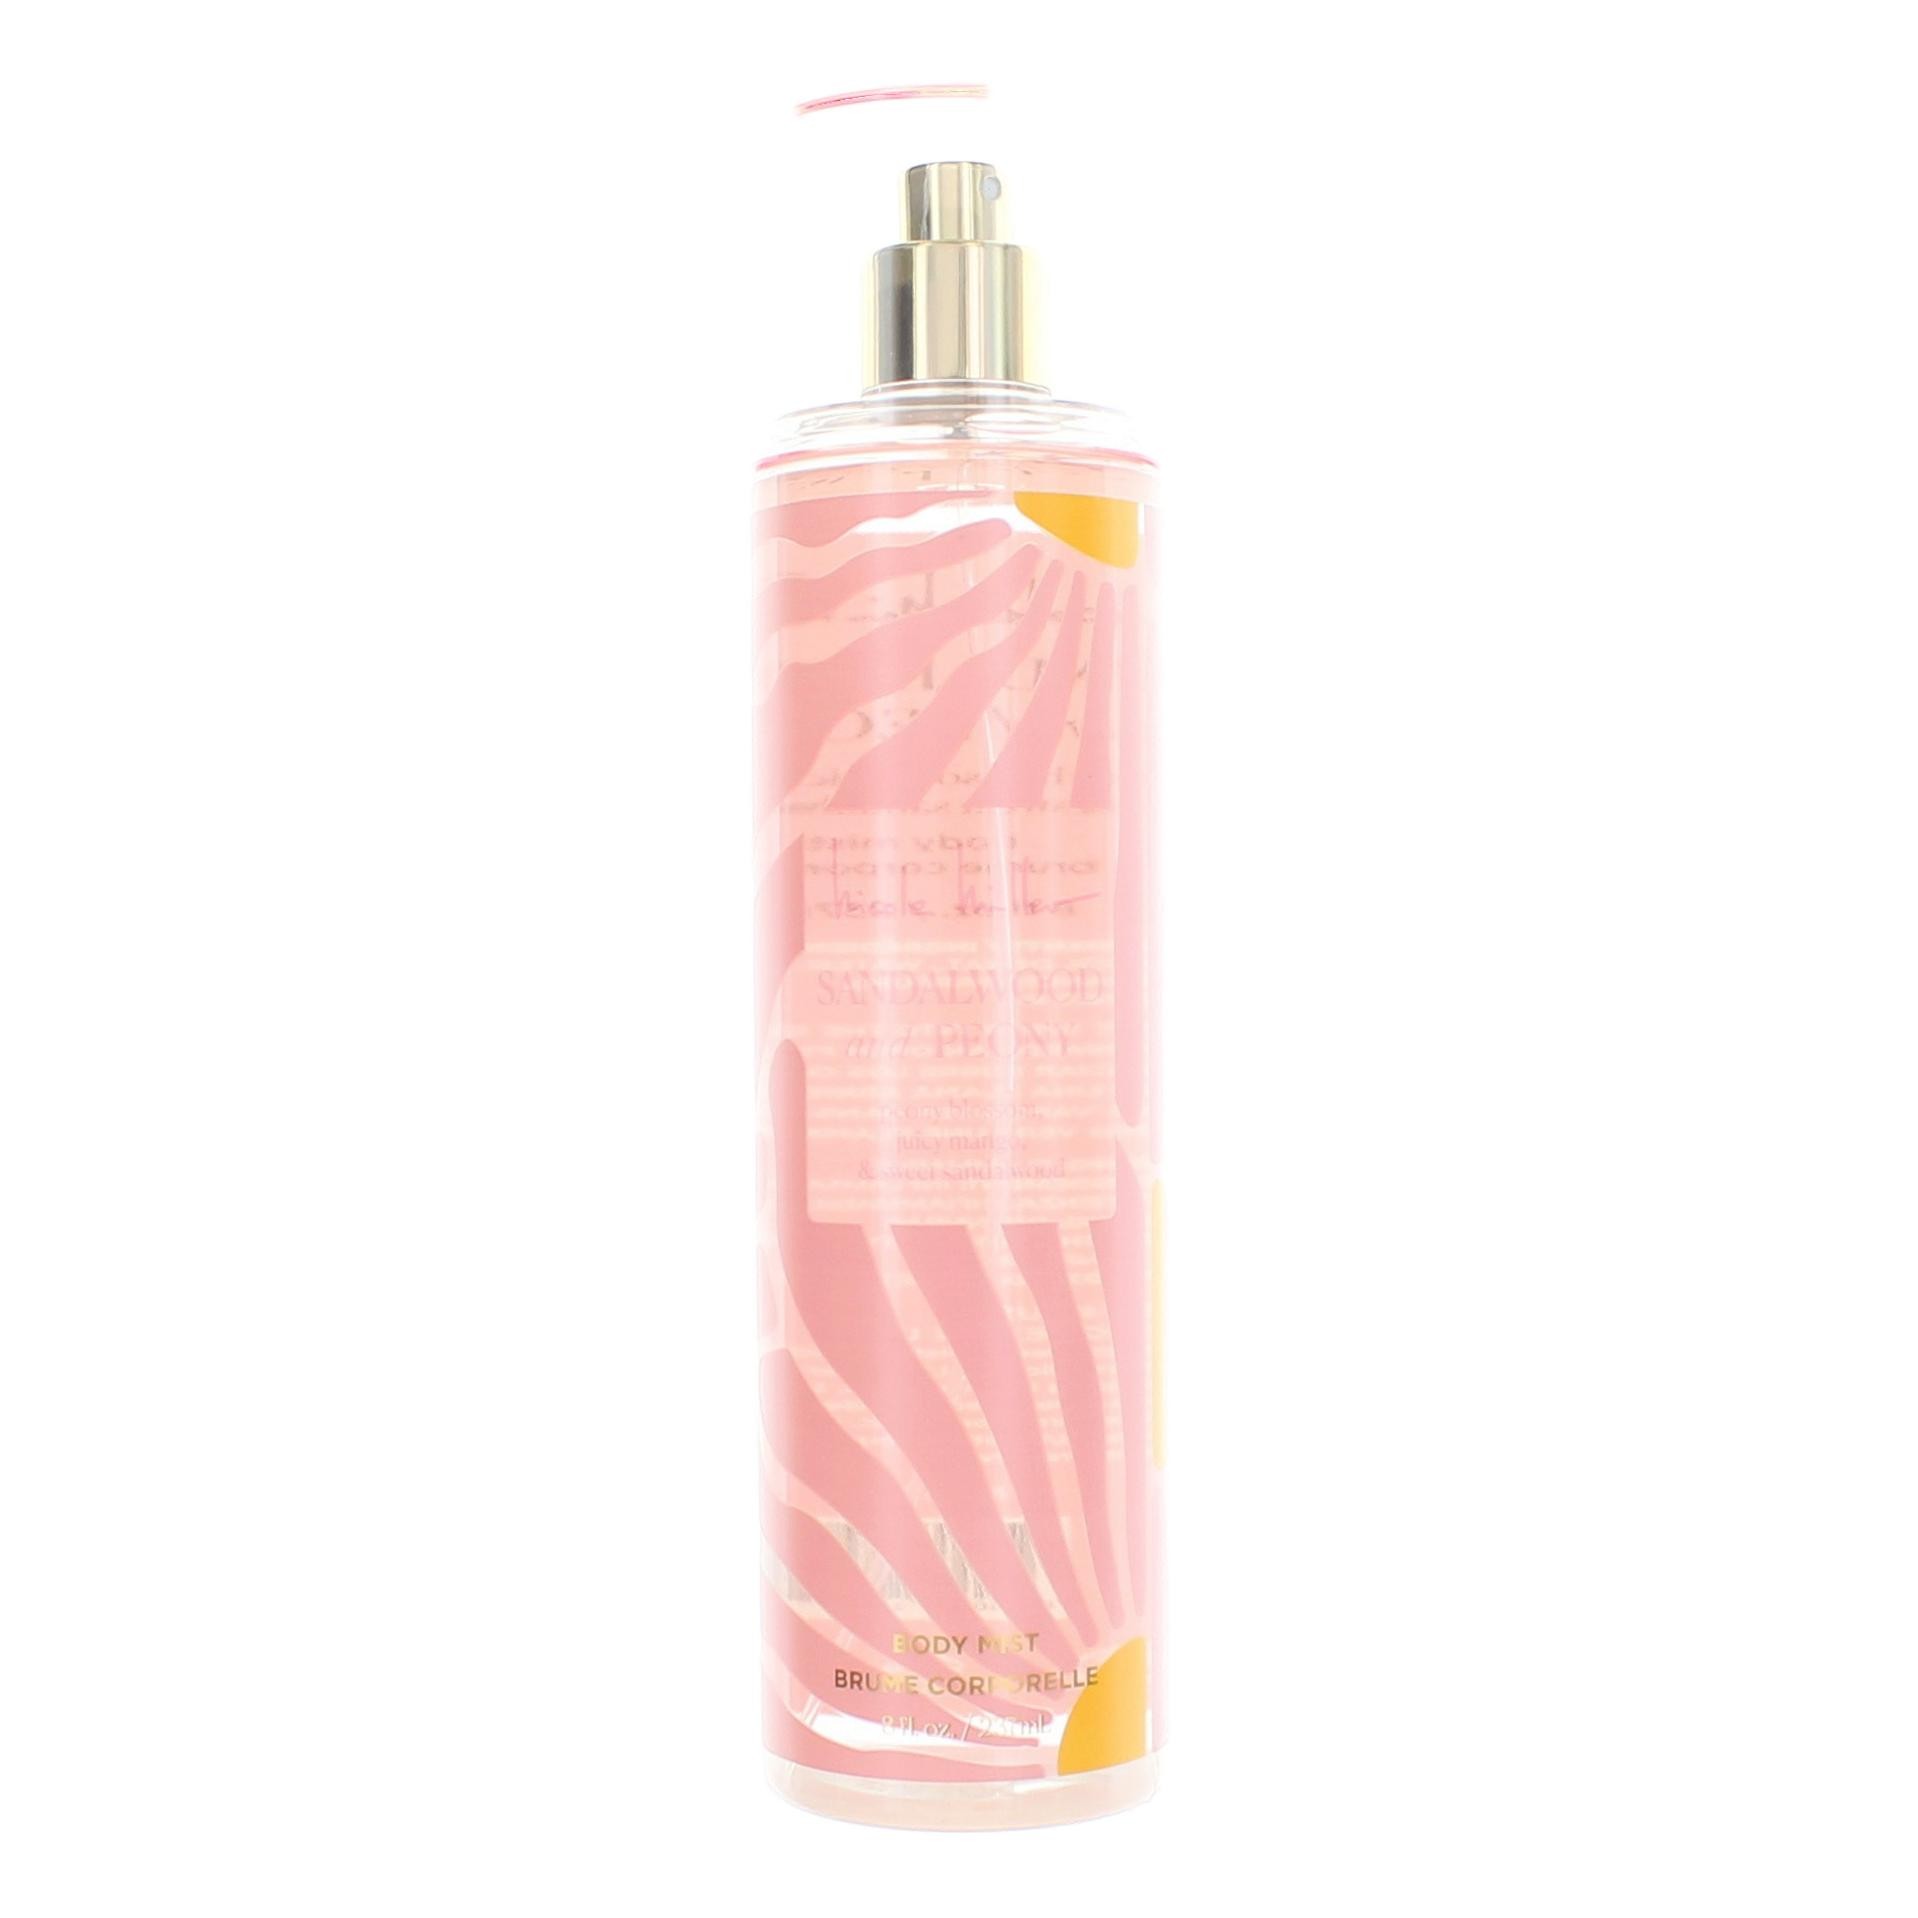 Sandalwood and Peony by Nicole Miller 8 oz Body Mist for Women